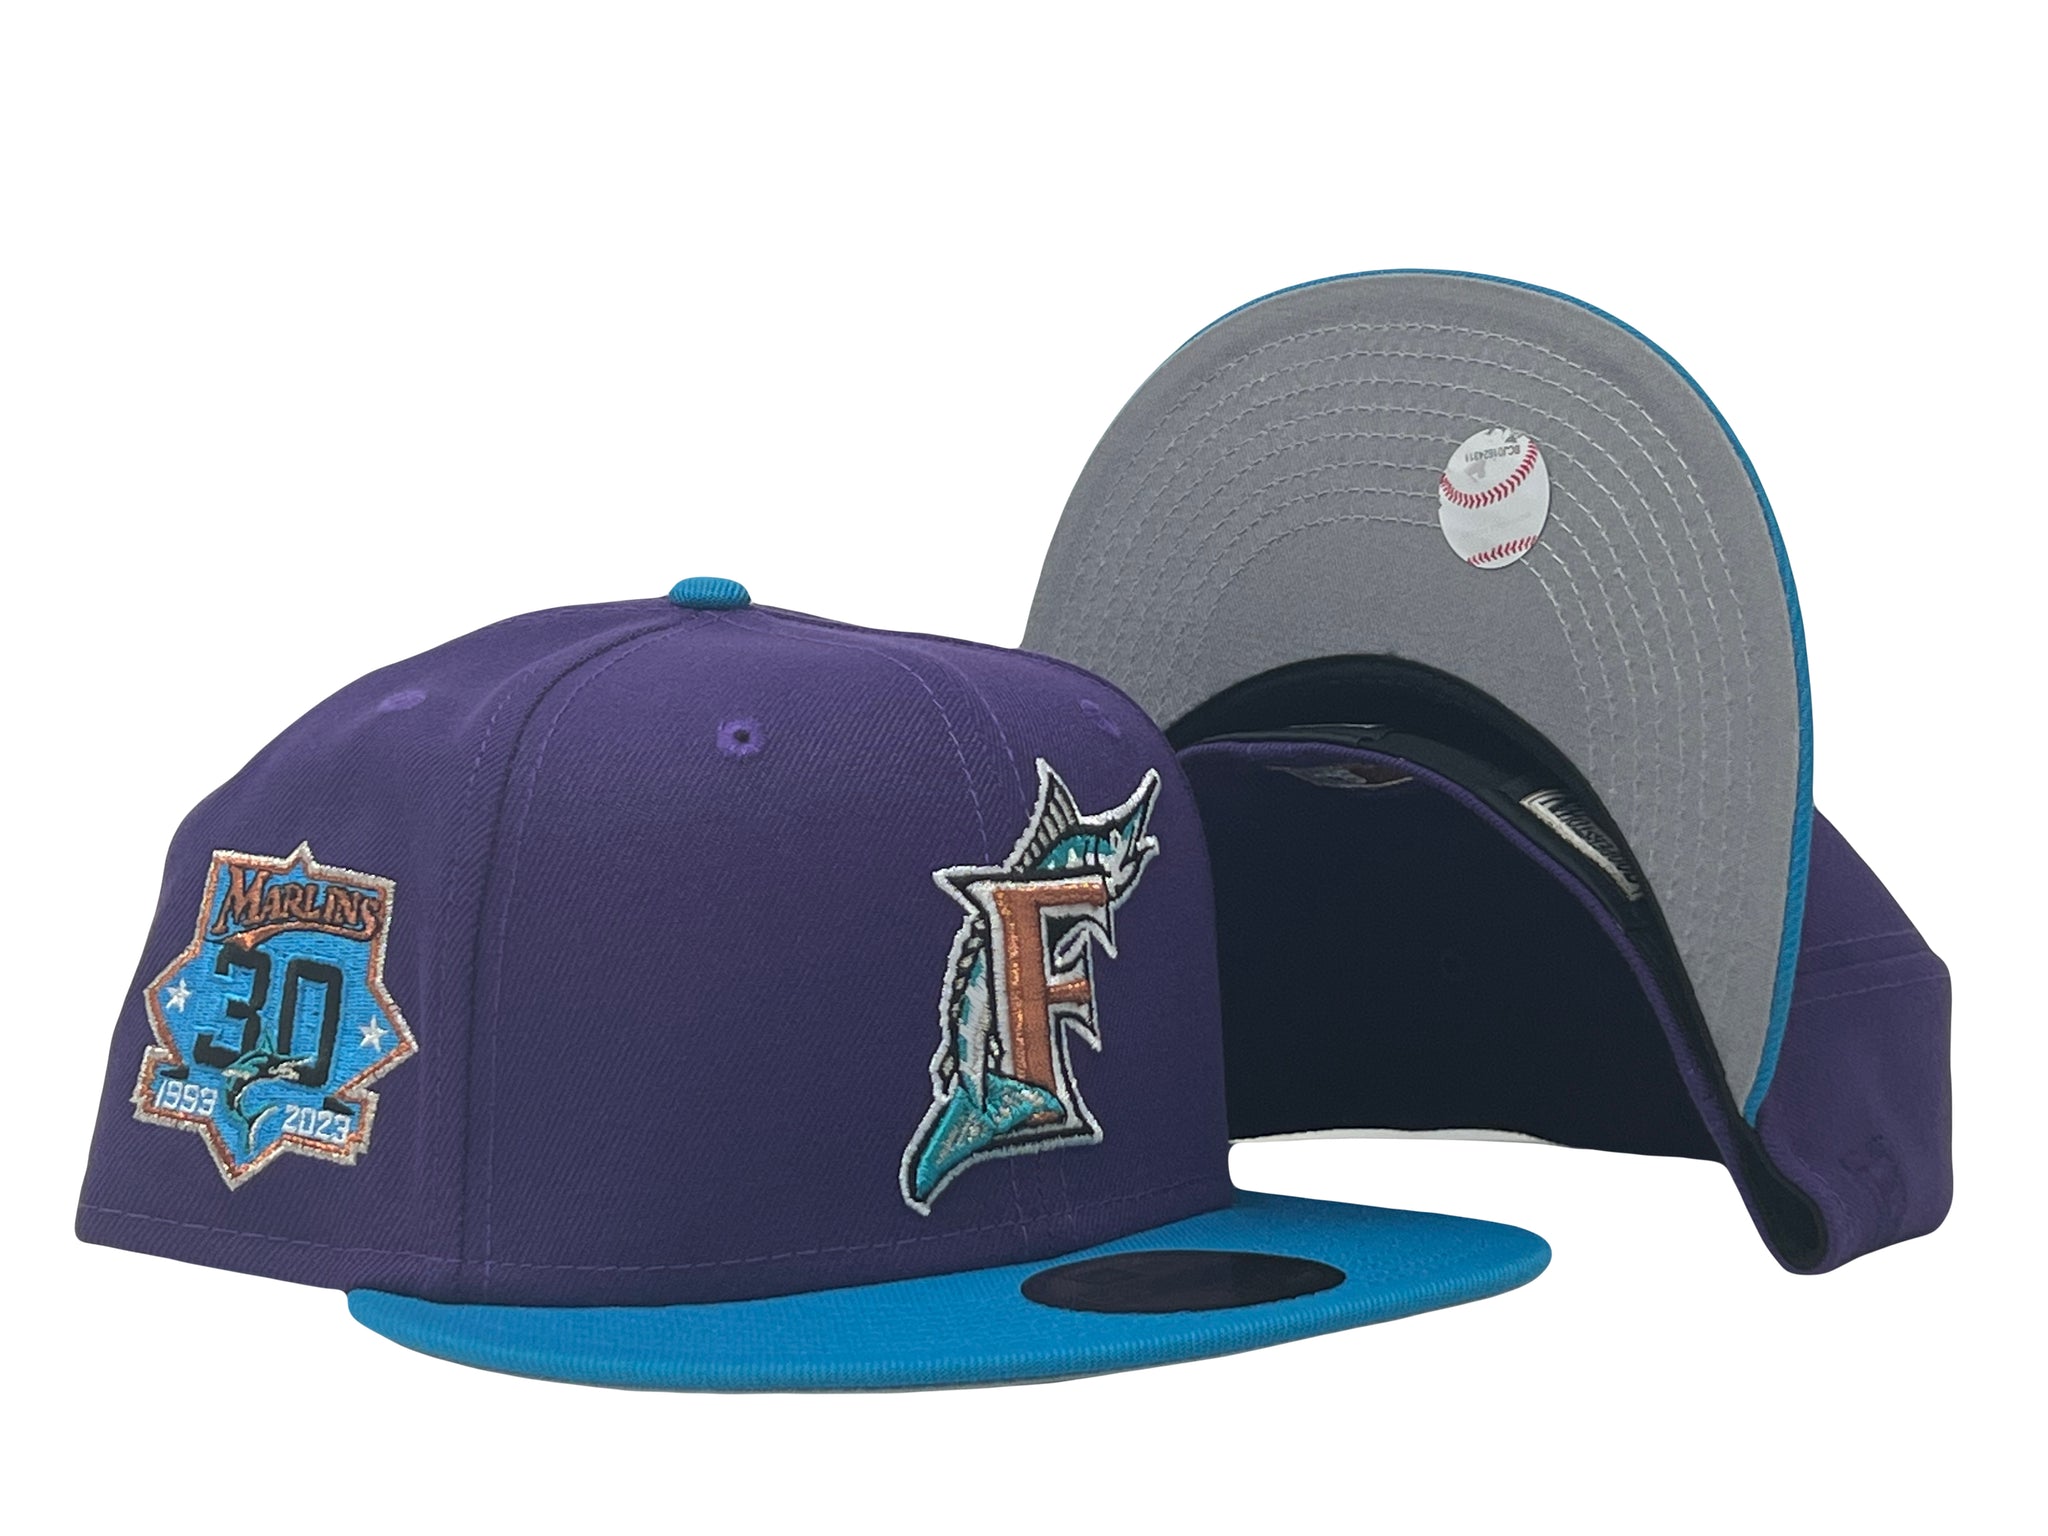 New Era Florida Marlins 59FIFTY Fitted Hat - Grey/ Pink/ Purple 7 3/4